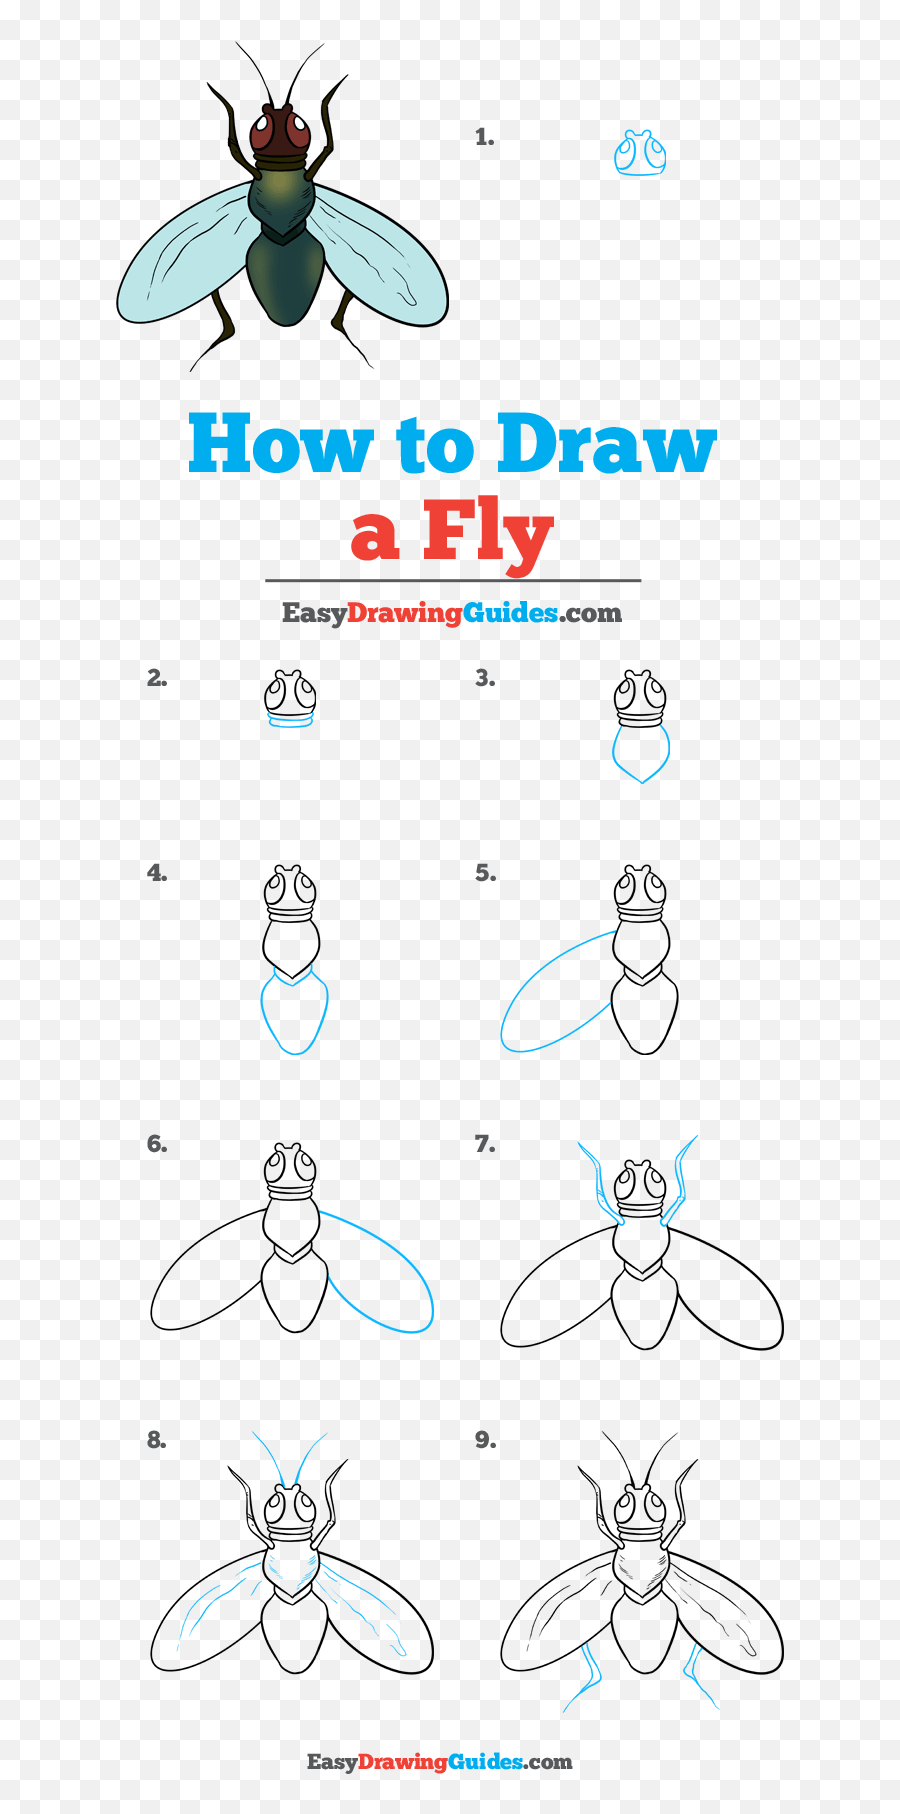 How To Draw A Fly - Really Easy Drawing Tutorial Draw A Paper Airplane Easy Emoji,Fly The W Emoji